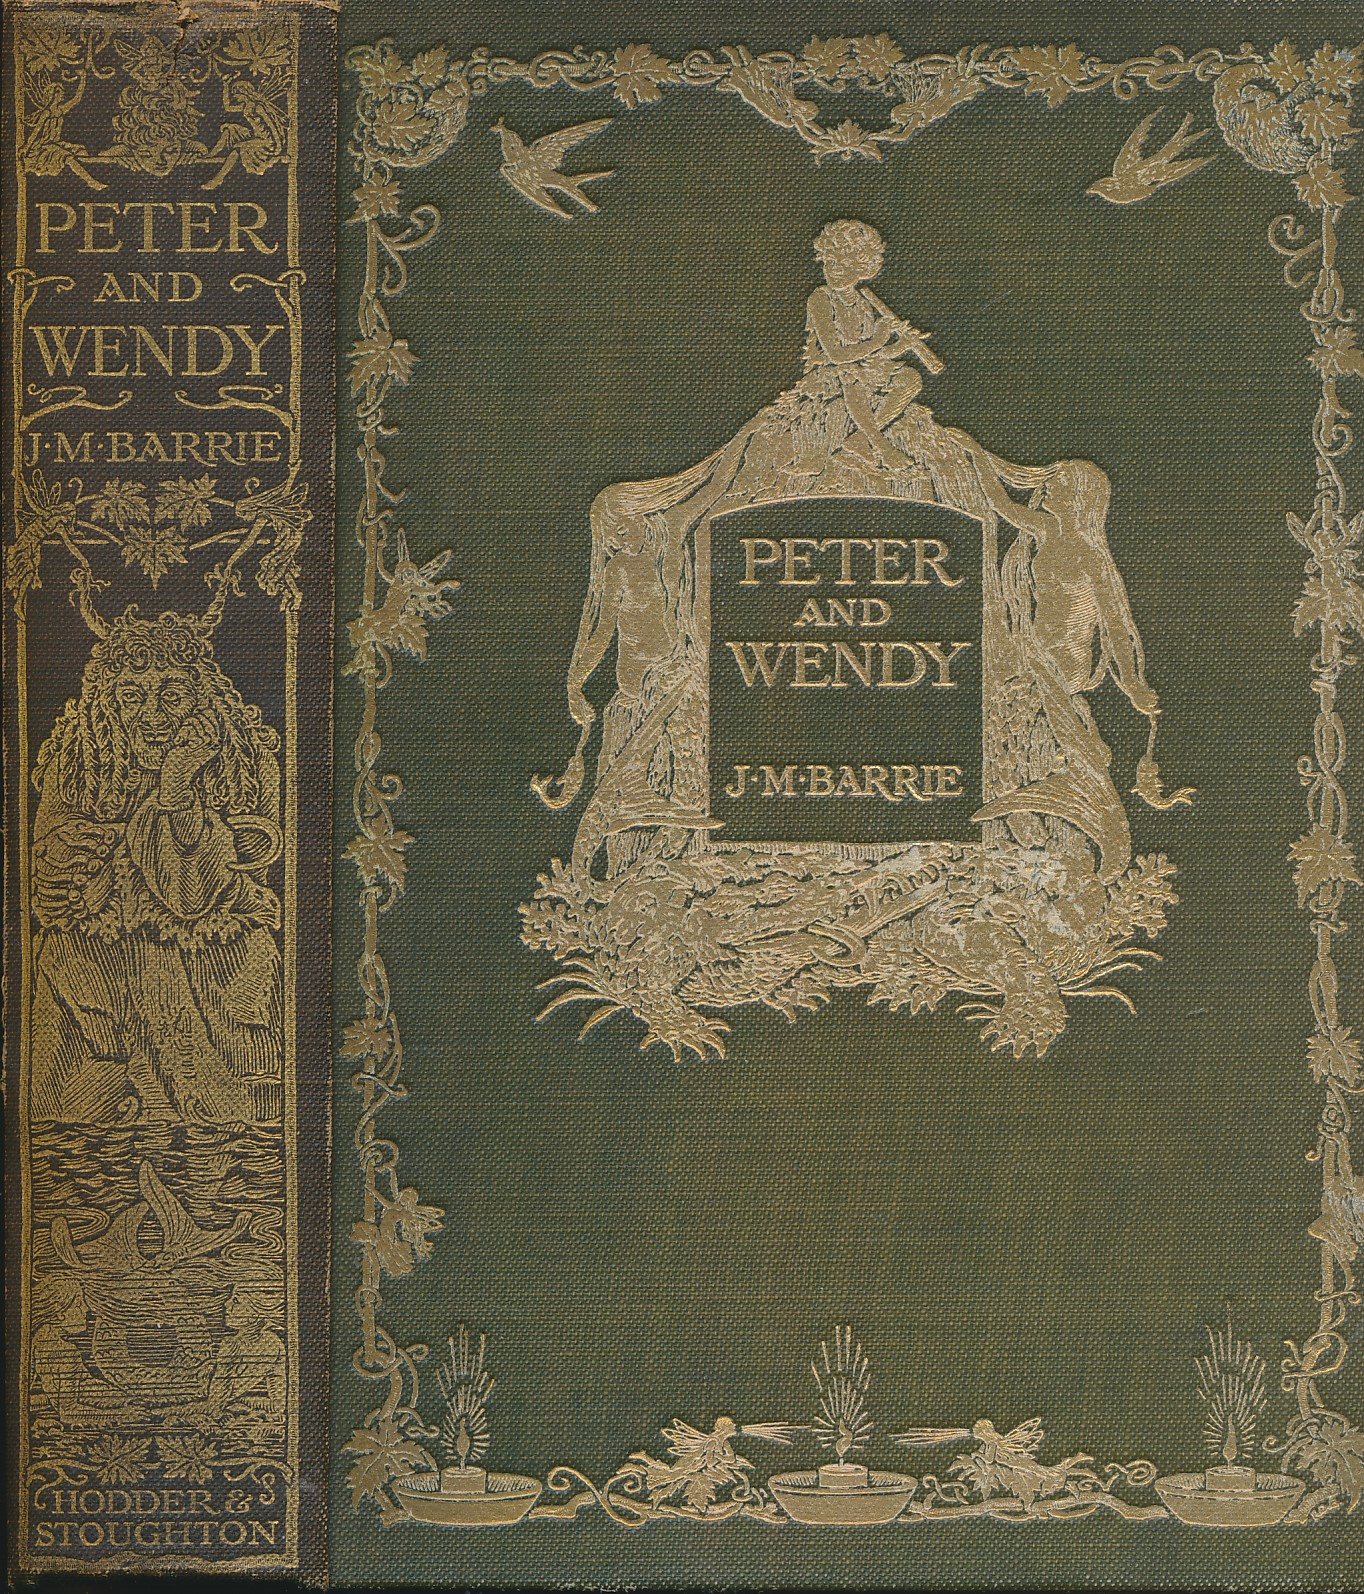 Peter and Wendy. Hodder edition. 1911.